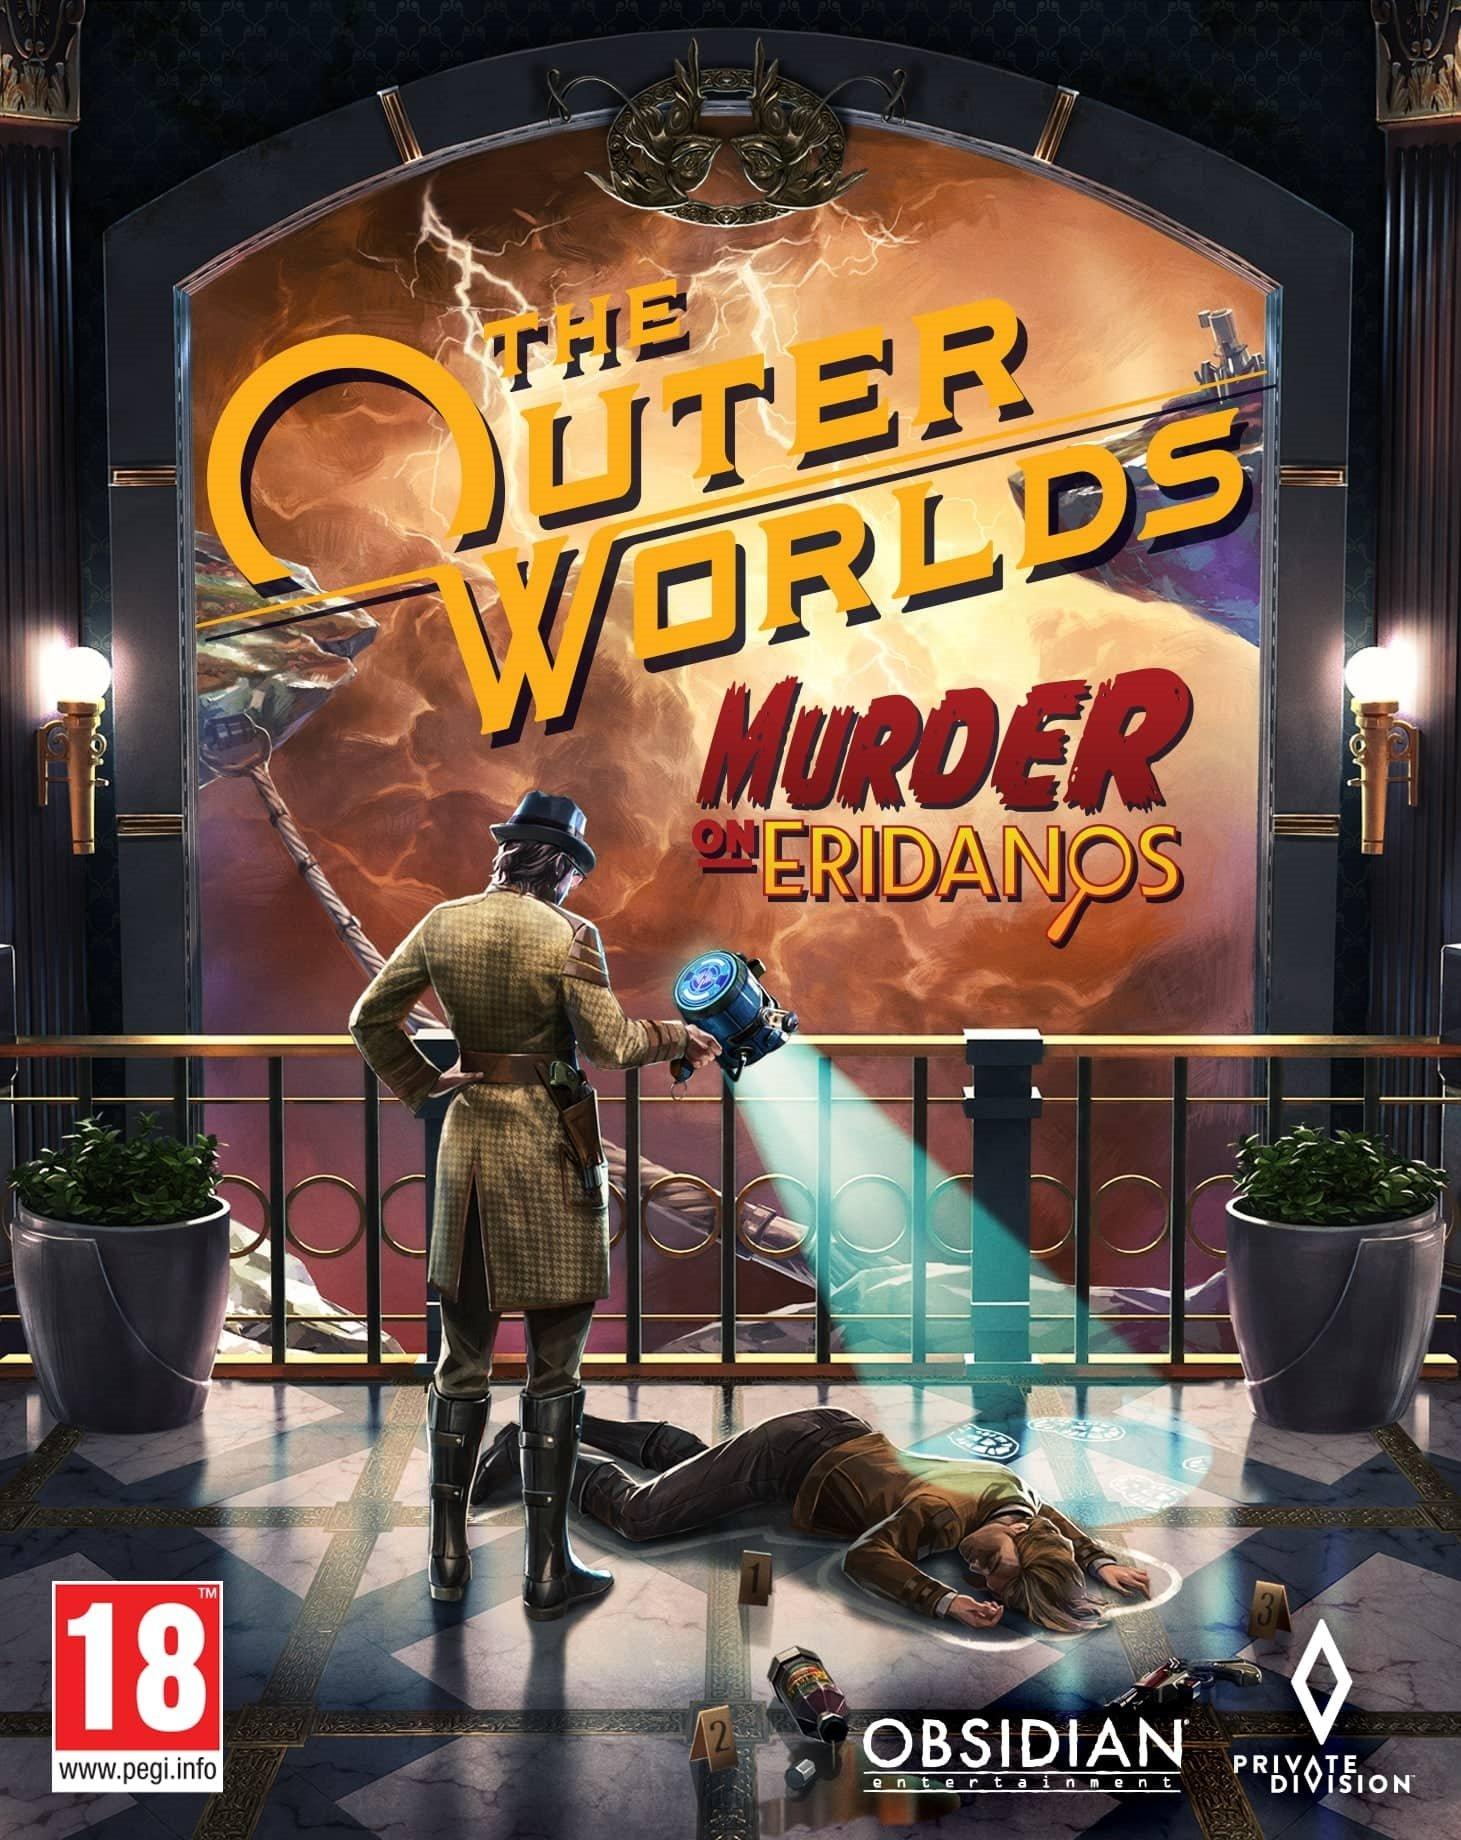 The Outer Worlds: Murder on Eridanos (Epic) | ROW